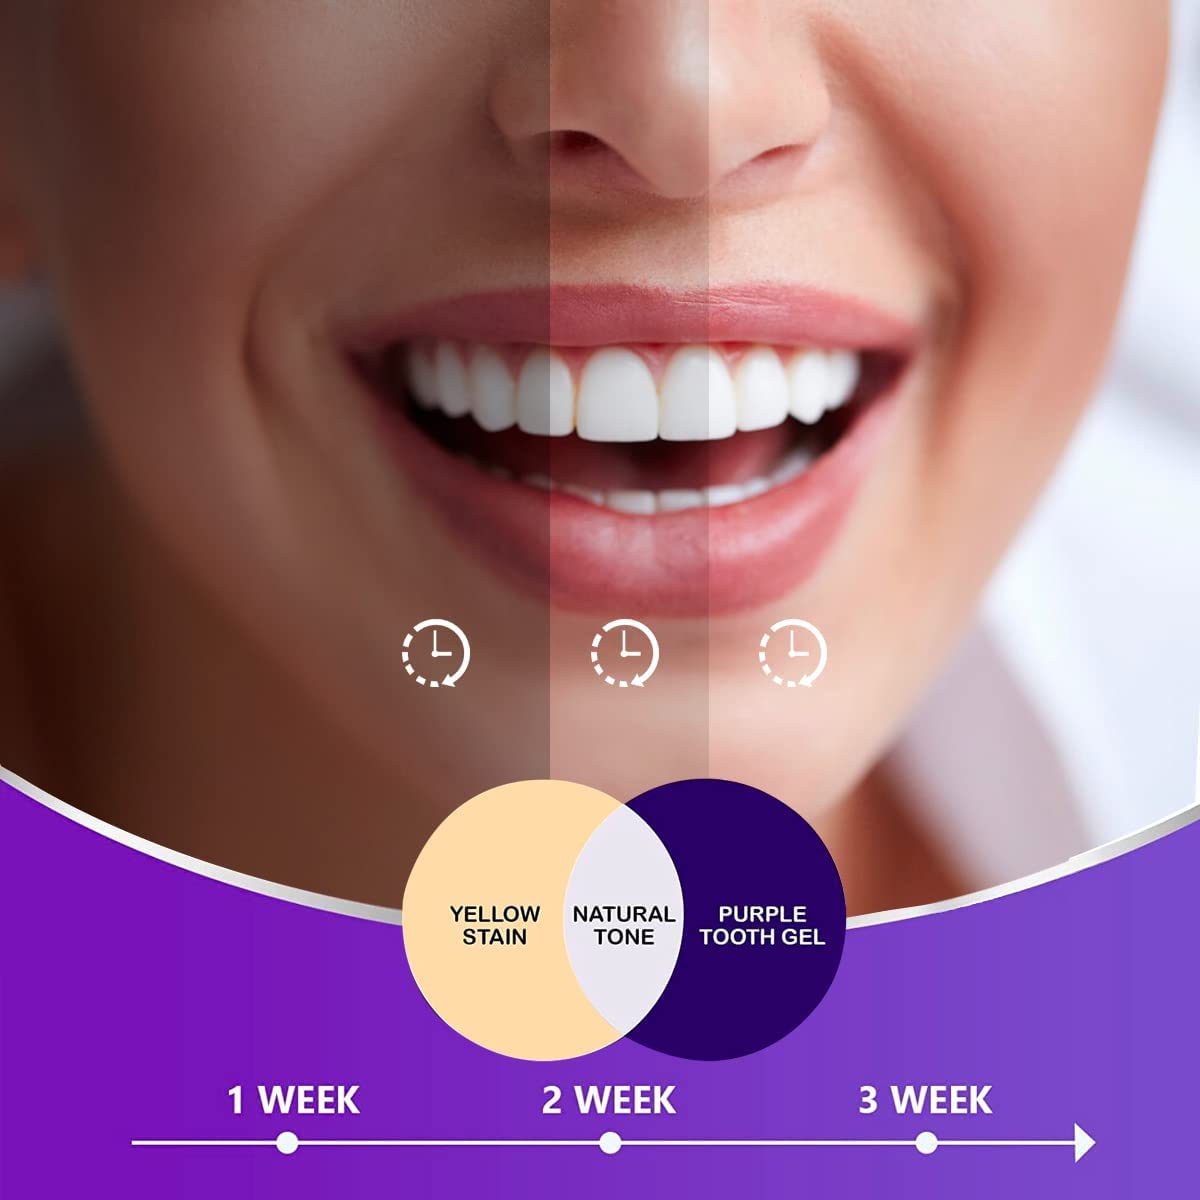 MEOLY Purple Toothpaste for Teeth Whitening - Premium Whitener, Non-Abrasive, color corrector - Tooth Stain Removal, Teeth Whitening K